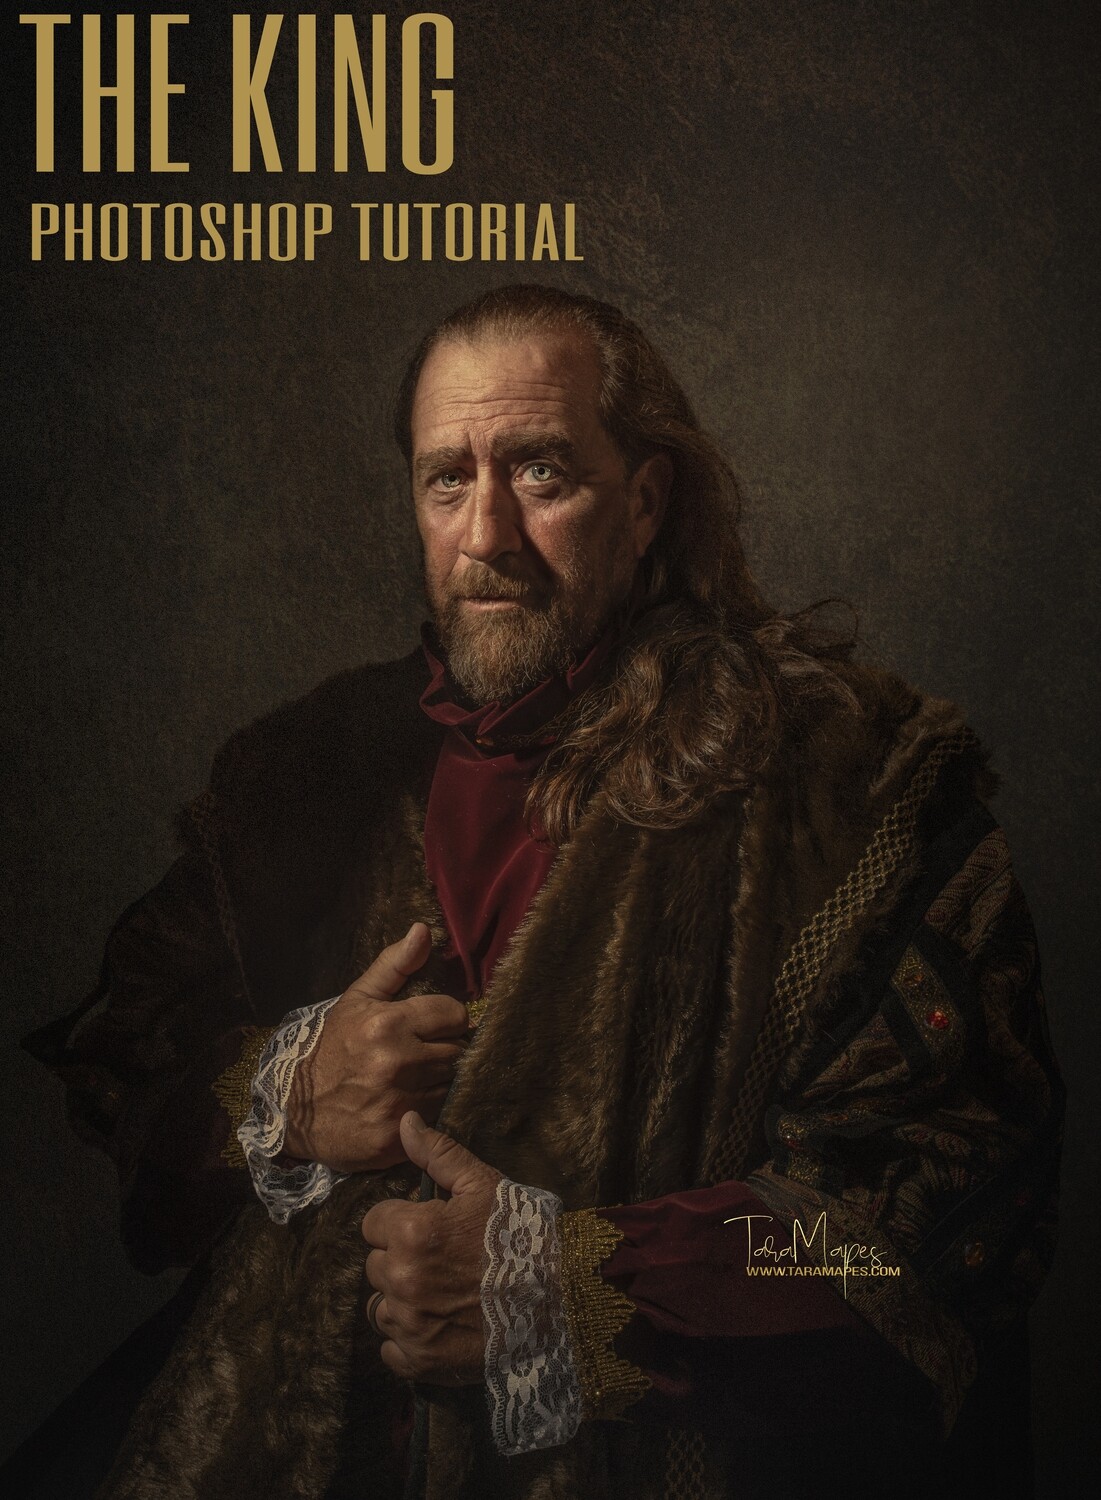 The King Painterly Fine Art Photoshop Tutorial by Tara Mapes